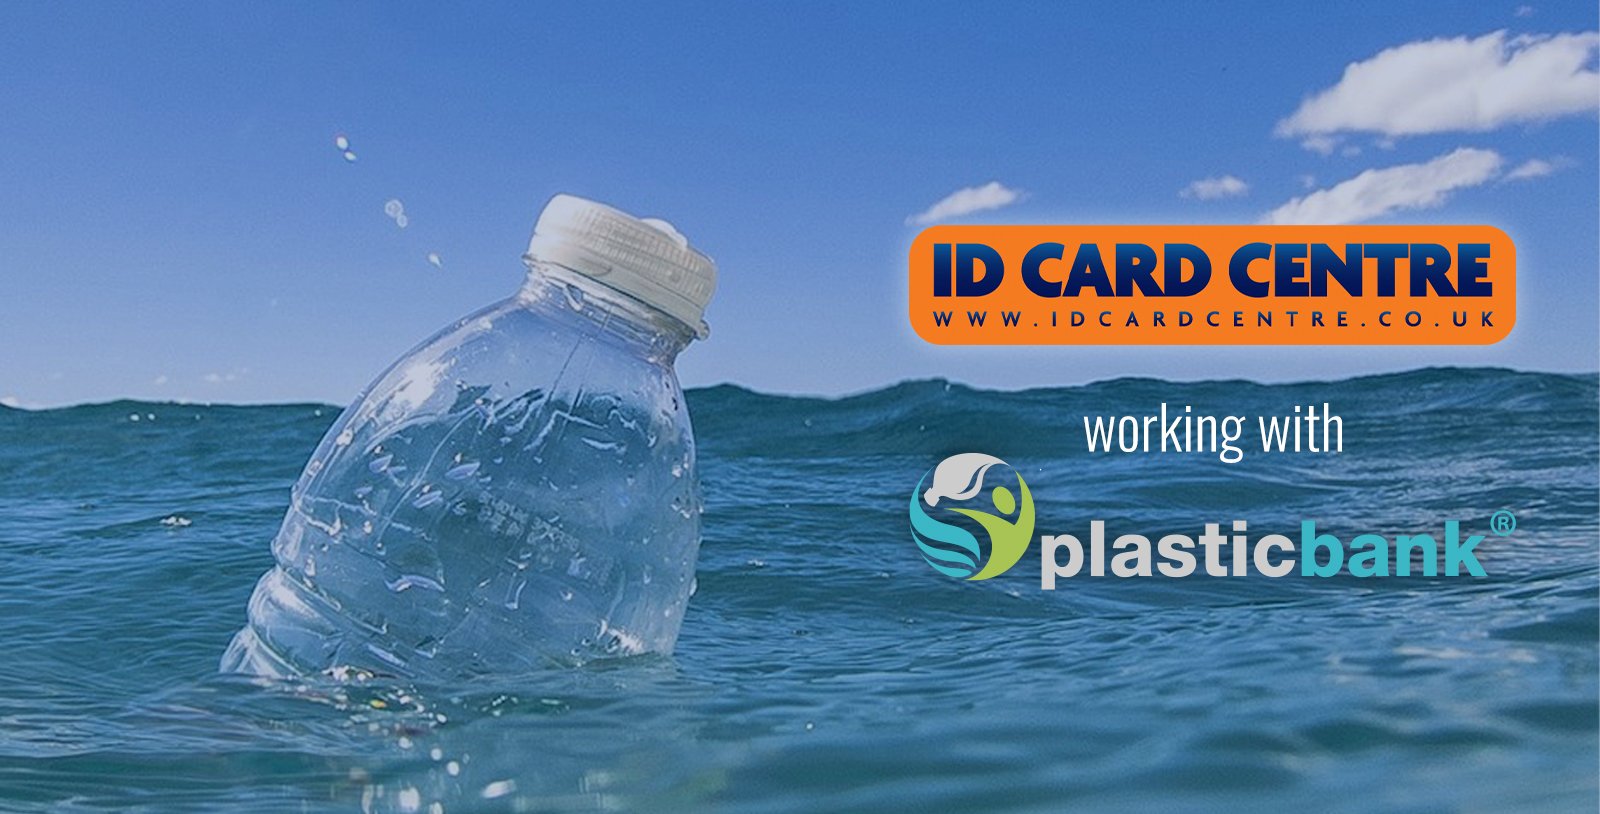 We are partnering up with Plastic Bank